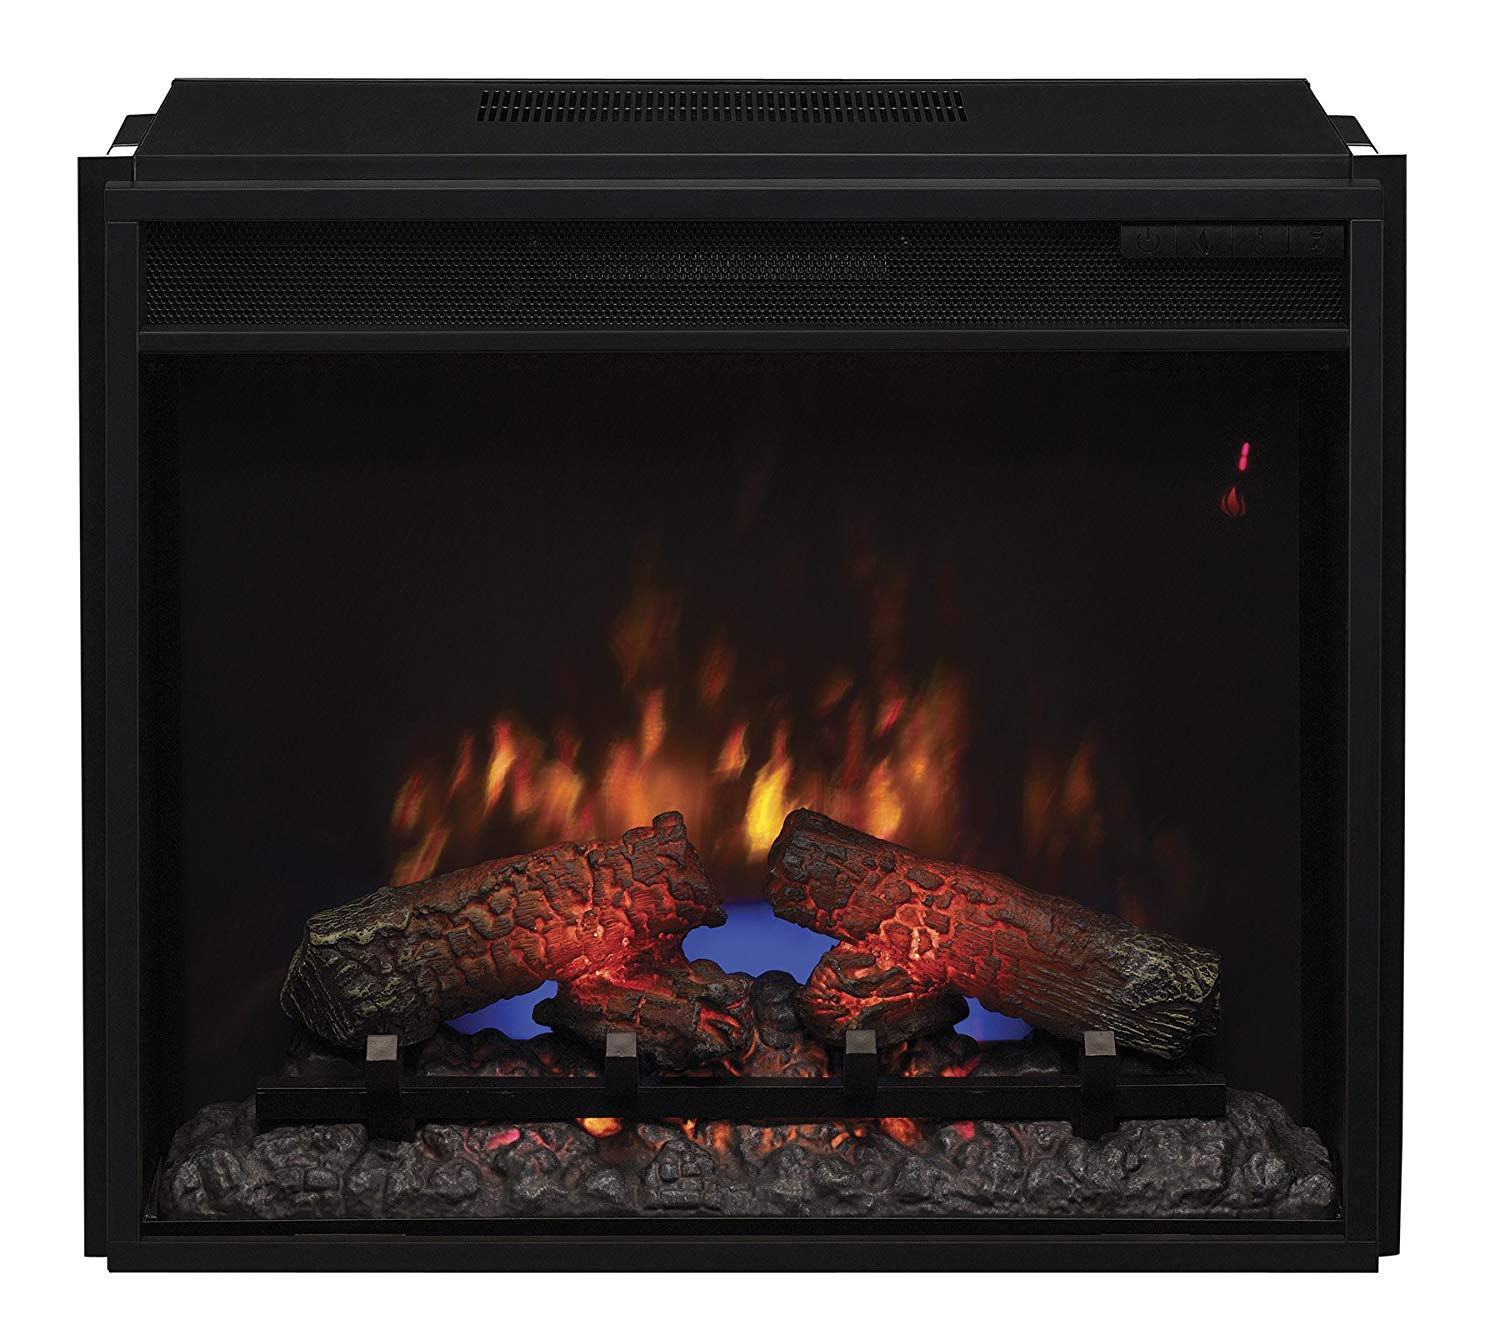 Big Lots Furniture Electric Fireplaces Beautiful Classicflame 23ef031grp 23" Electric Fireplace Insert with Safer Plug